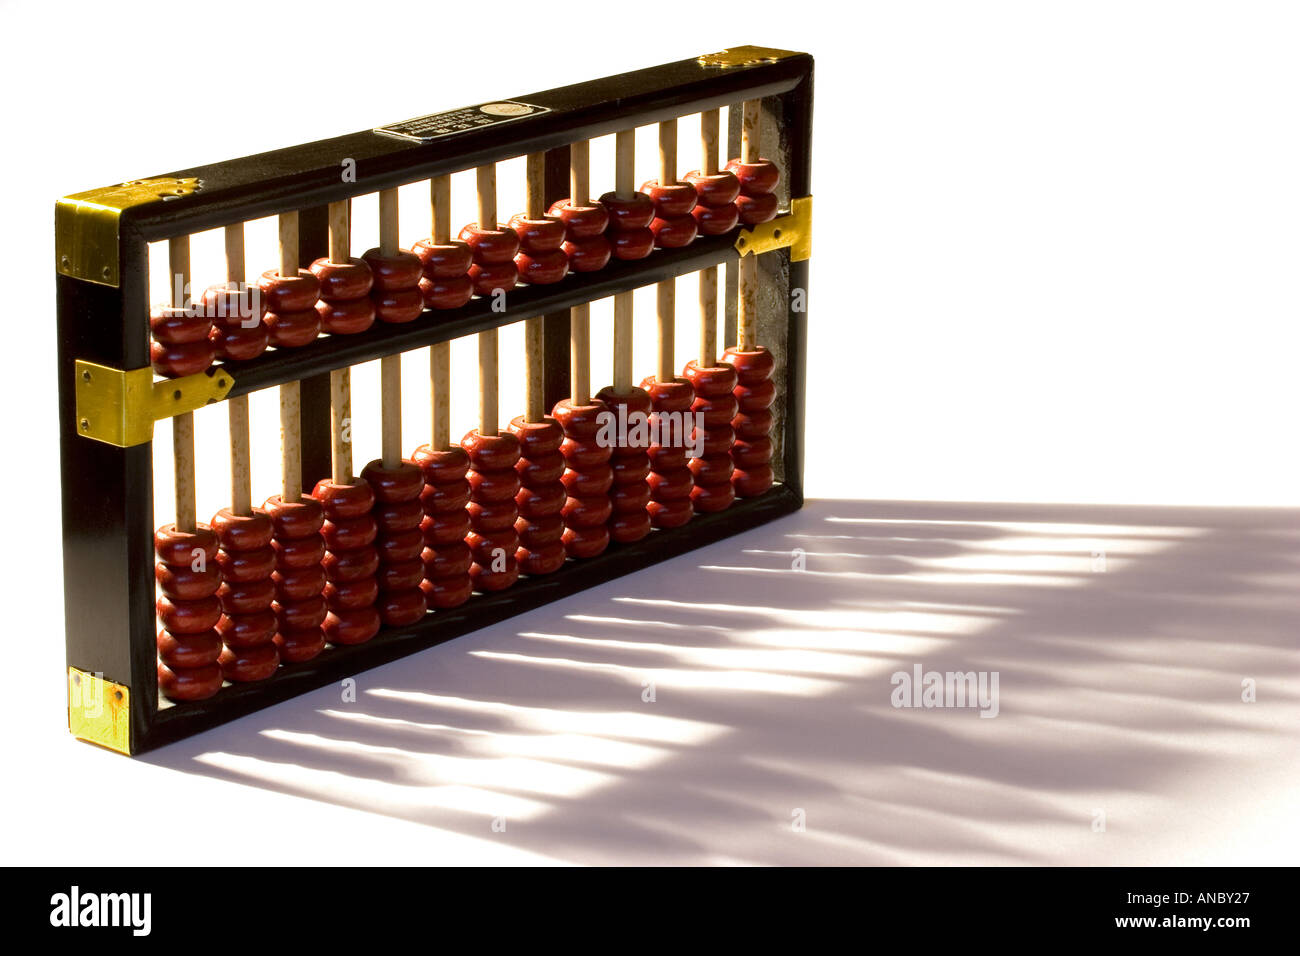 Abacus casting shadow Stock Photo